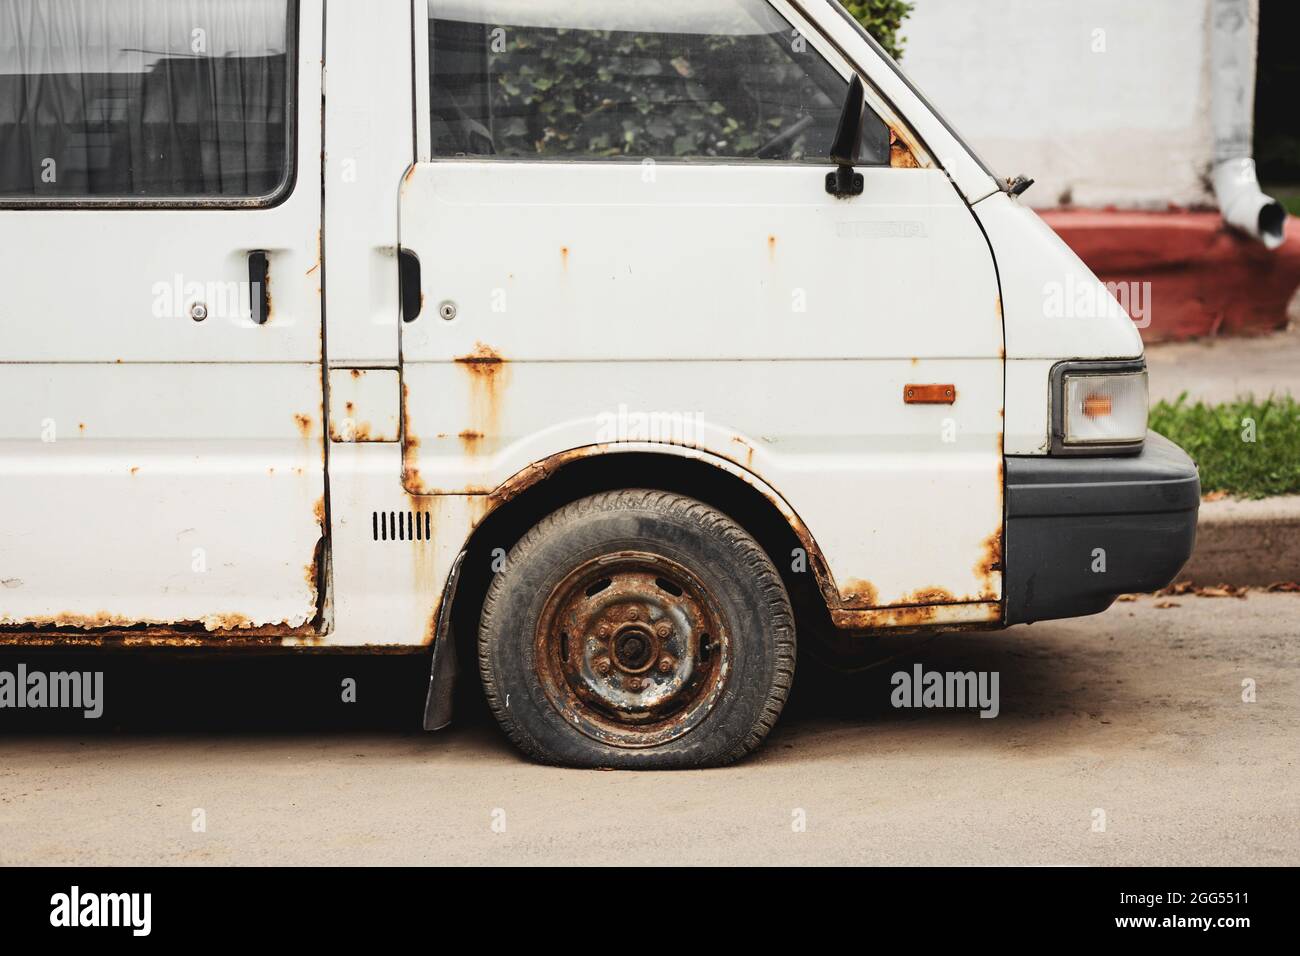 White rusty abandoned compact van. Unnecessary malfunctioning car junk truck abandoned on the side of the road Stock Photo